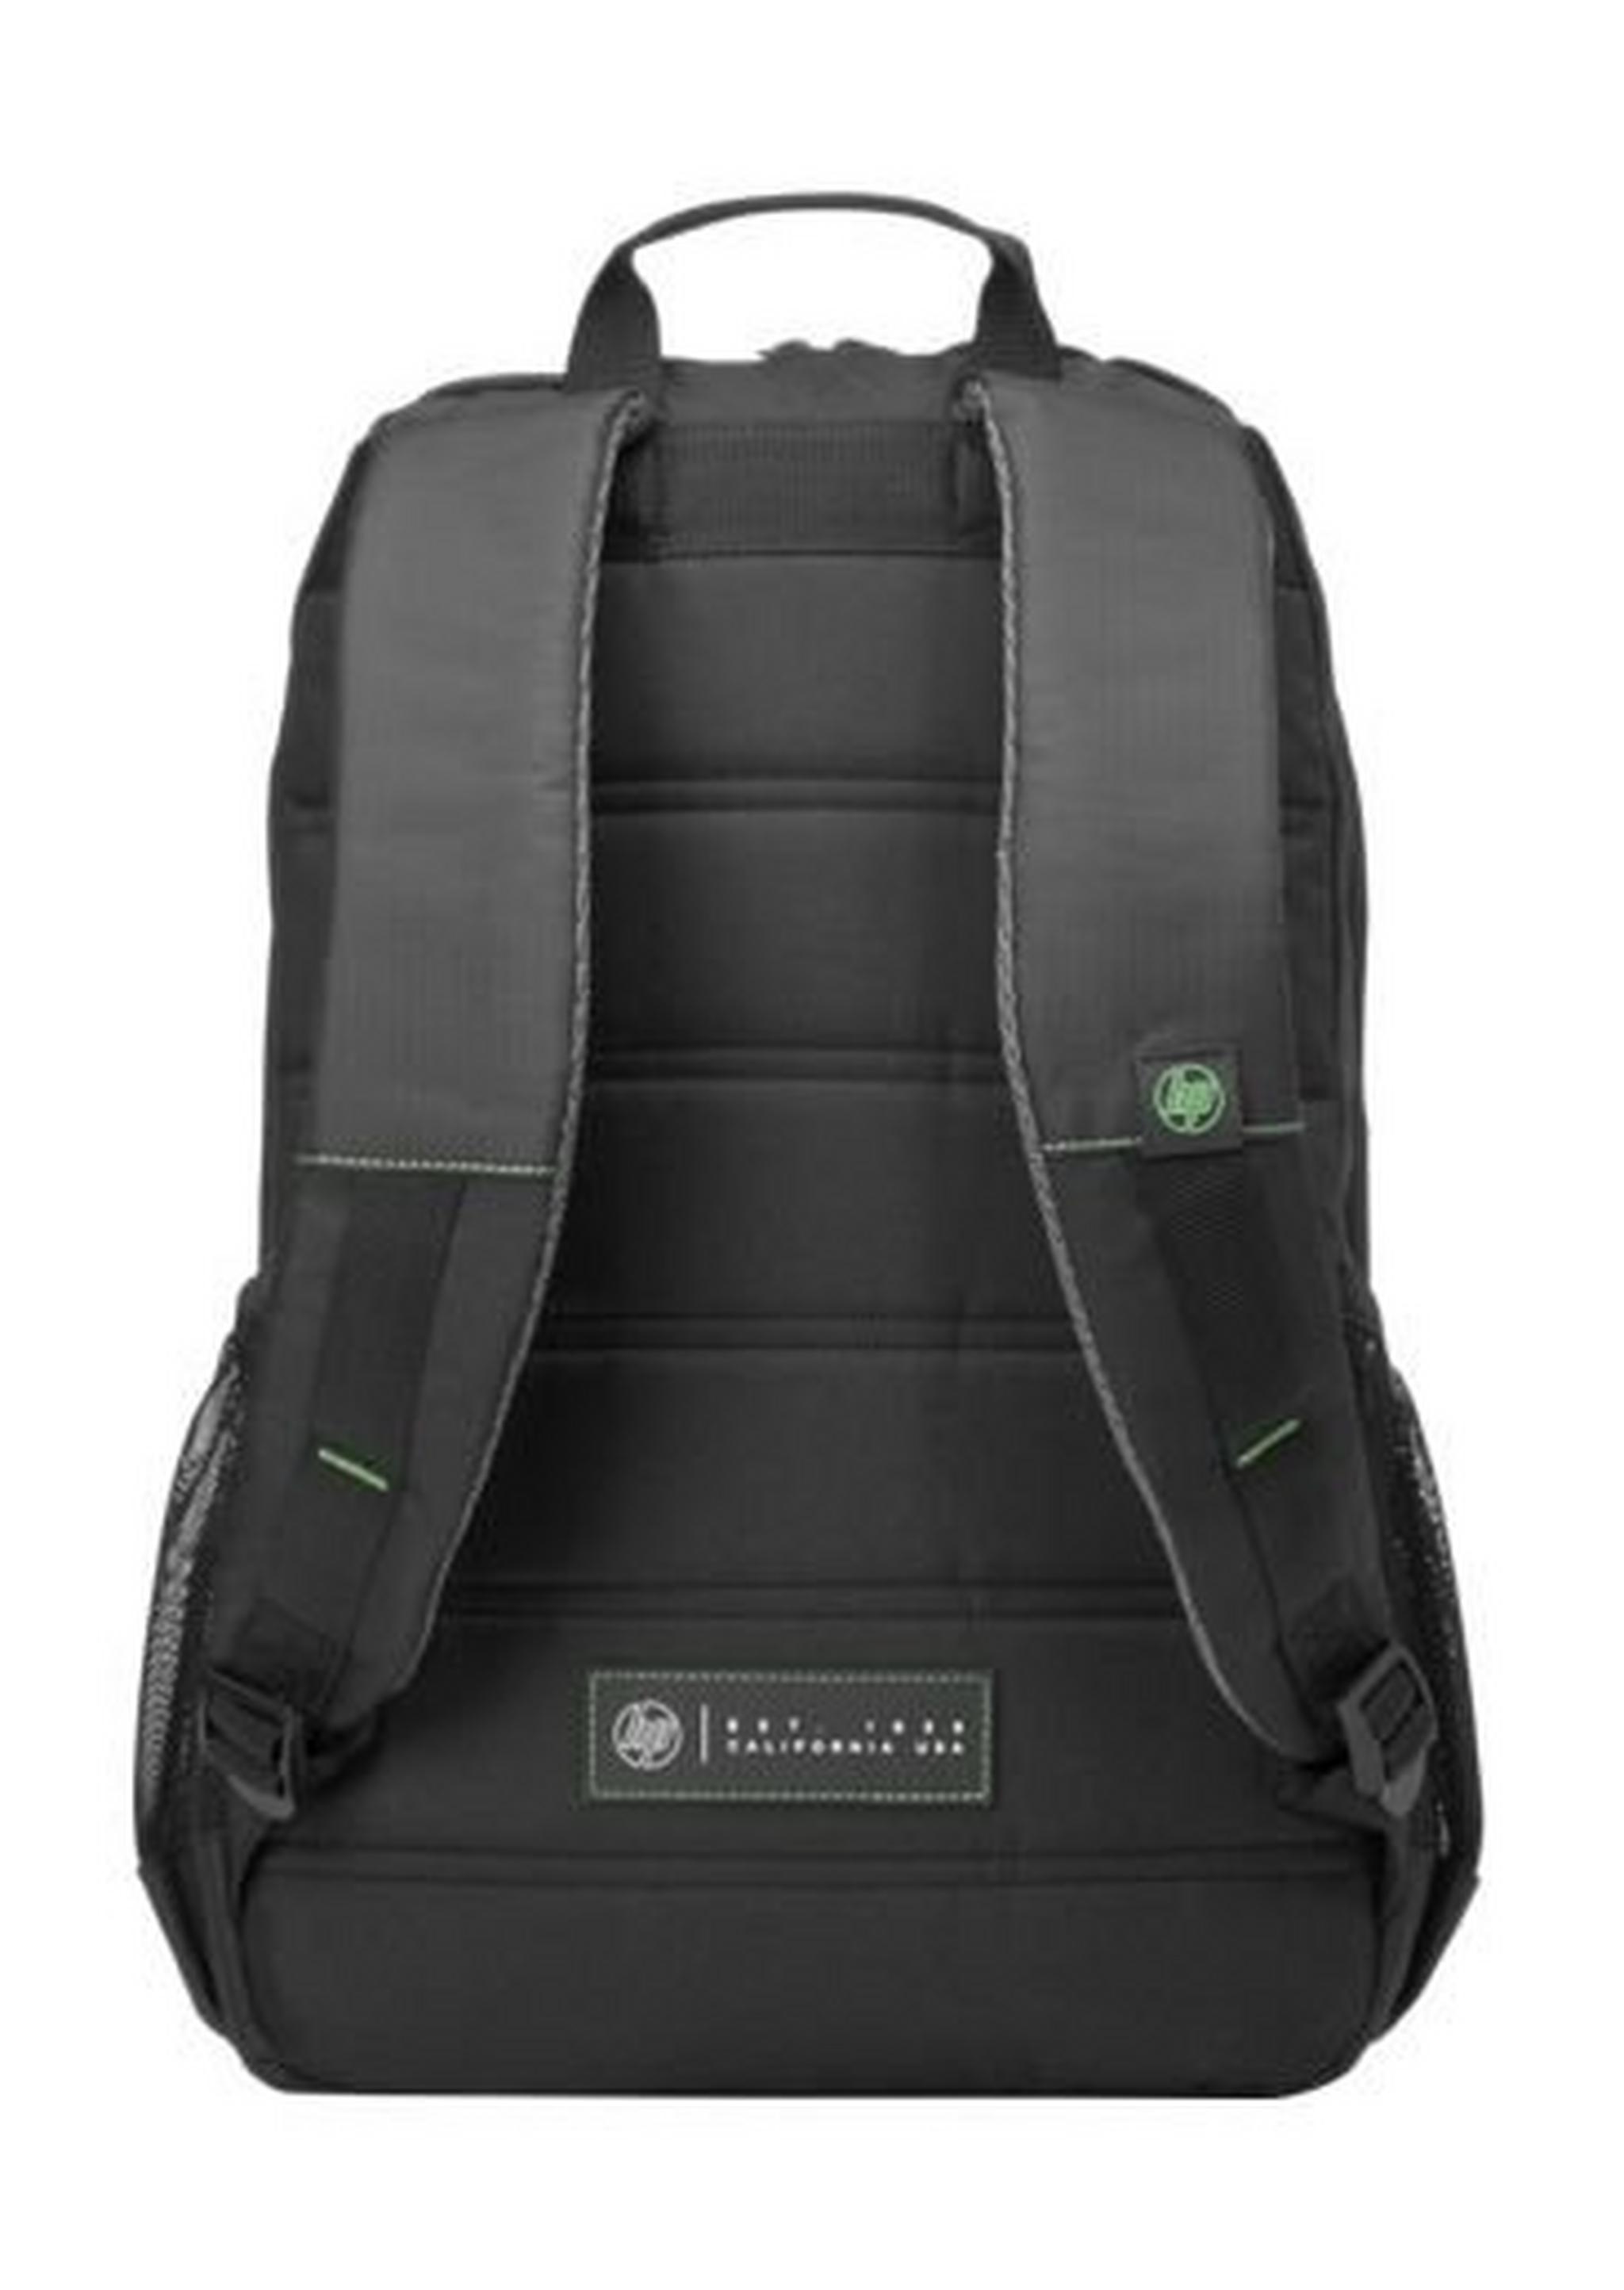 HP Active Backpack For 15.6 inch Laptop - Black